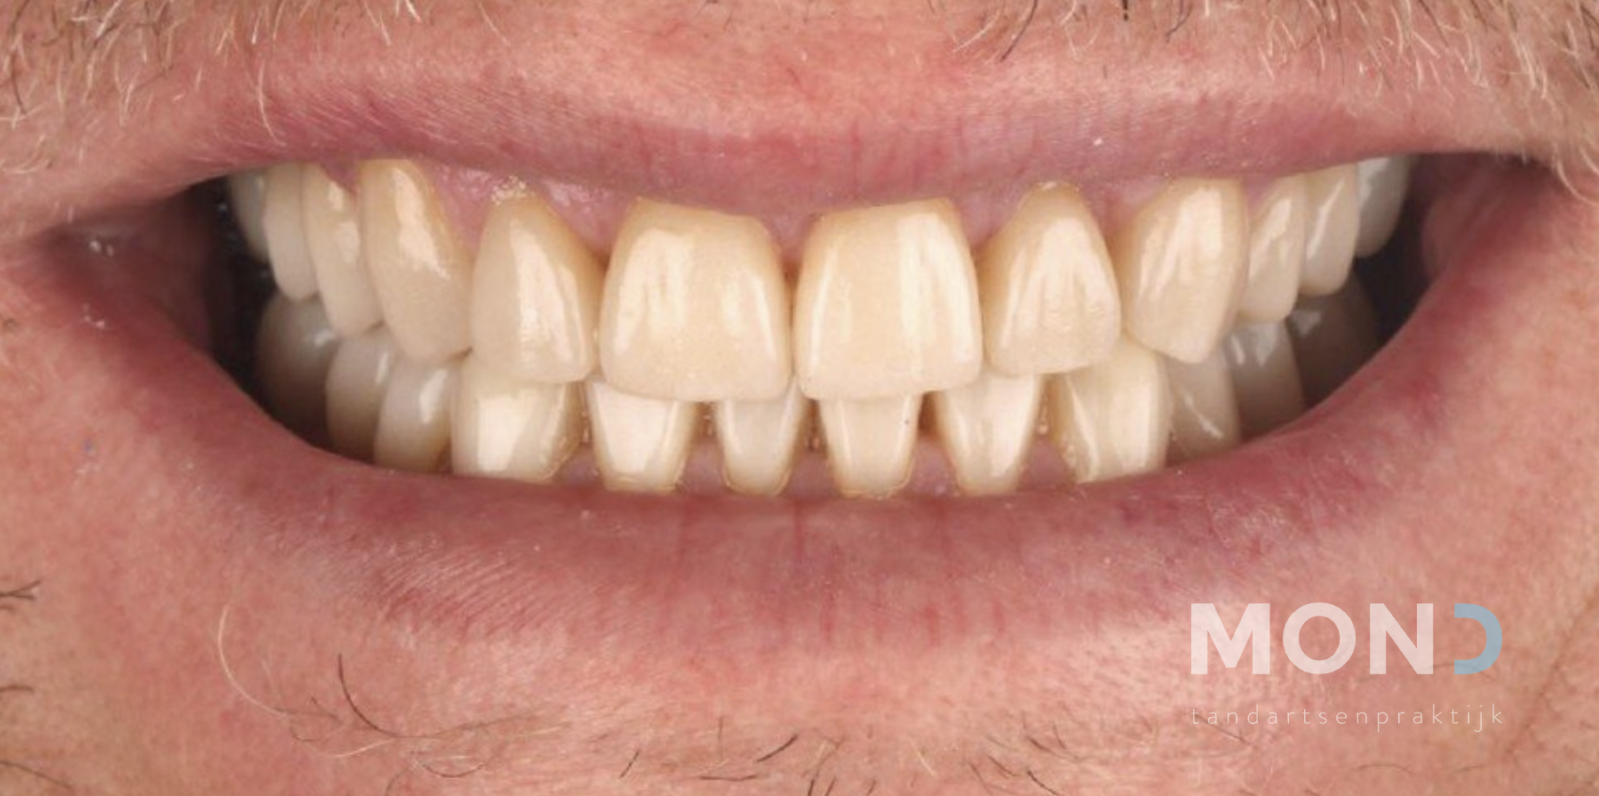 Repair with crowns and veneers after nail biting